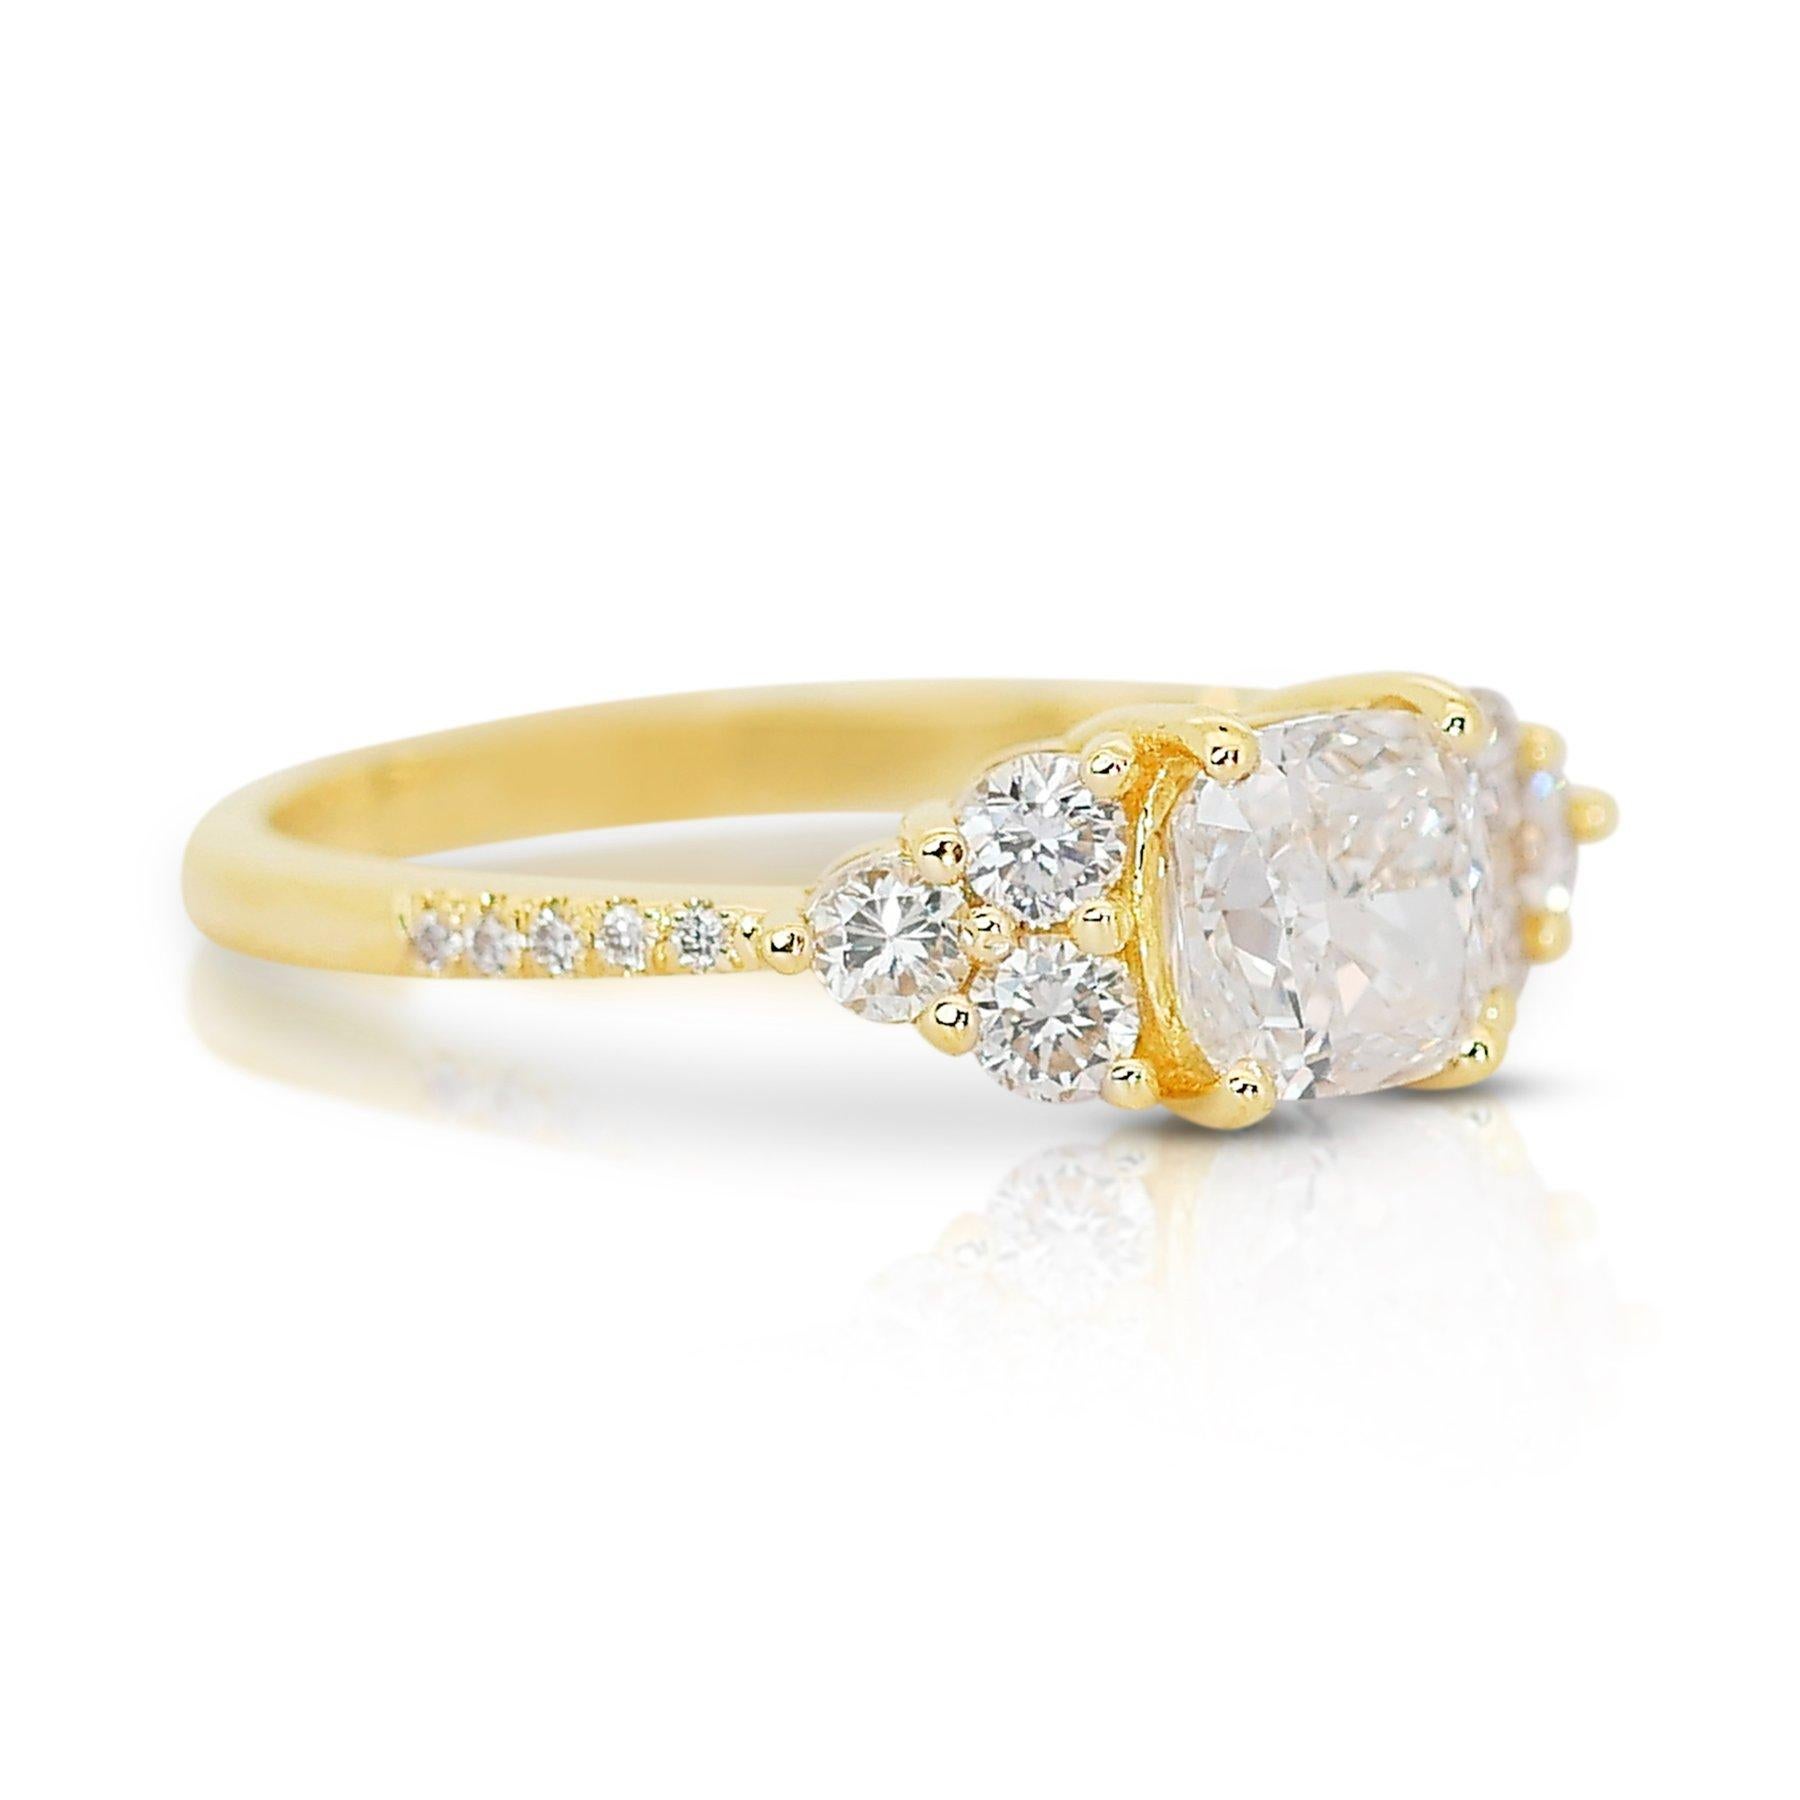 Cushion Cut Lustrous 1.32ct Diamond Pave Ring in 18k Yellow Gold - GIA Certified For Sale